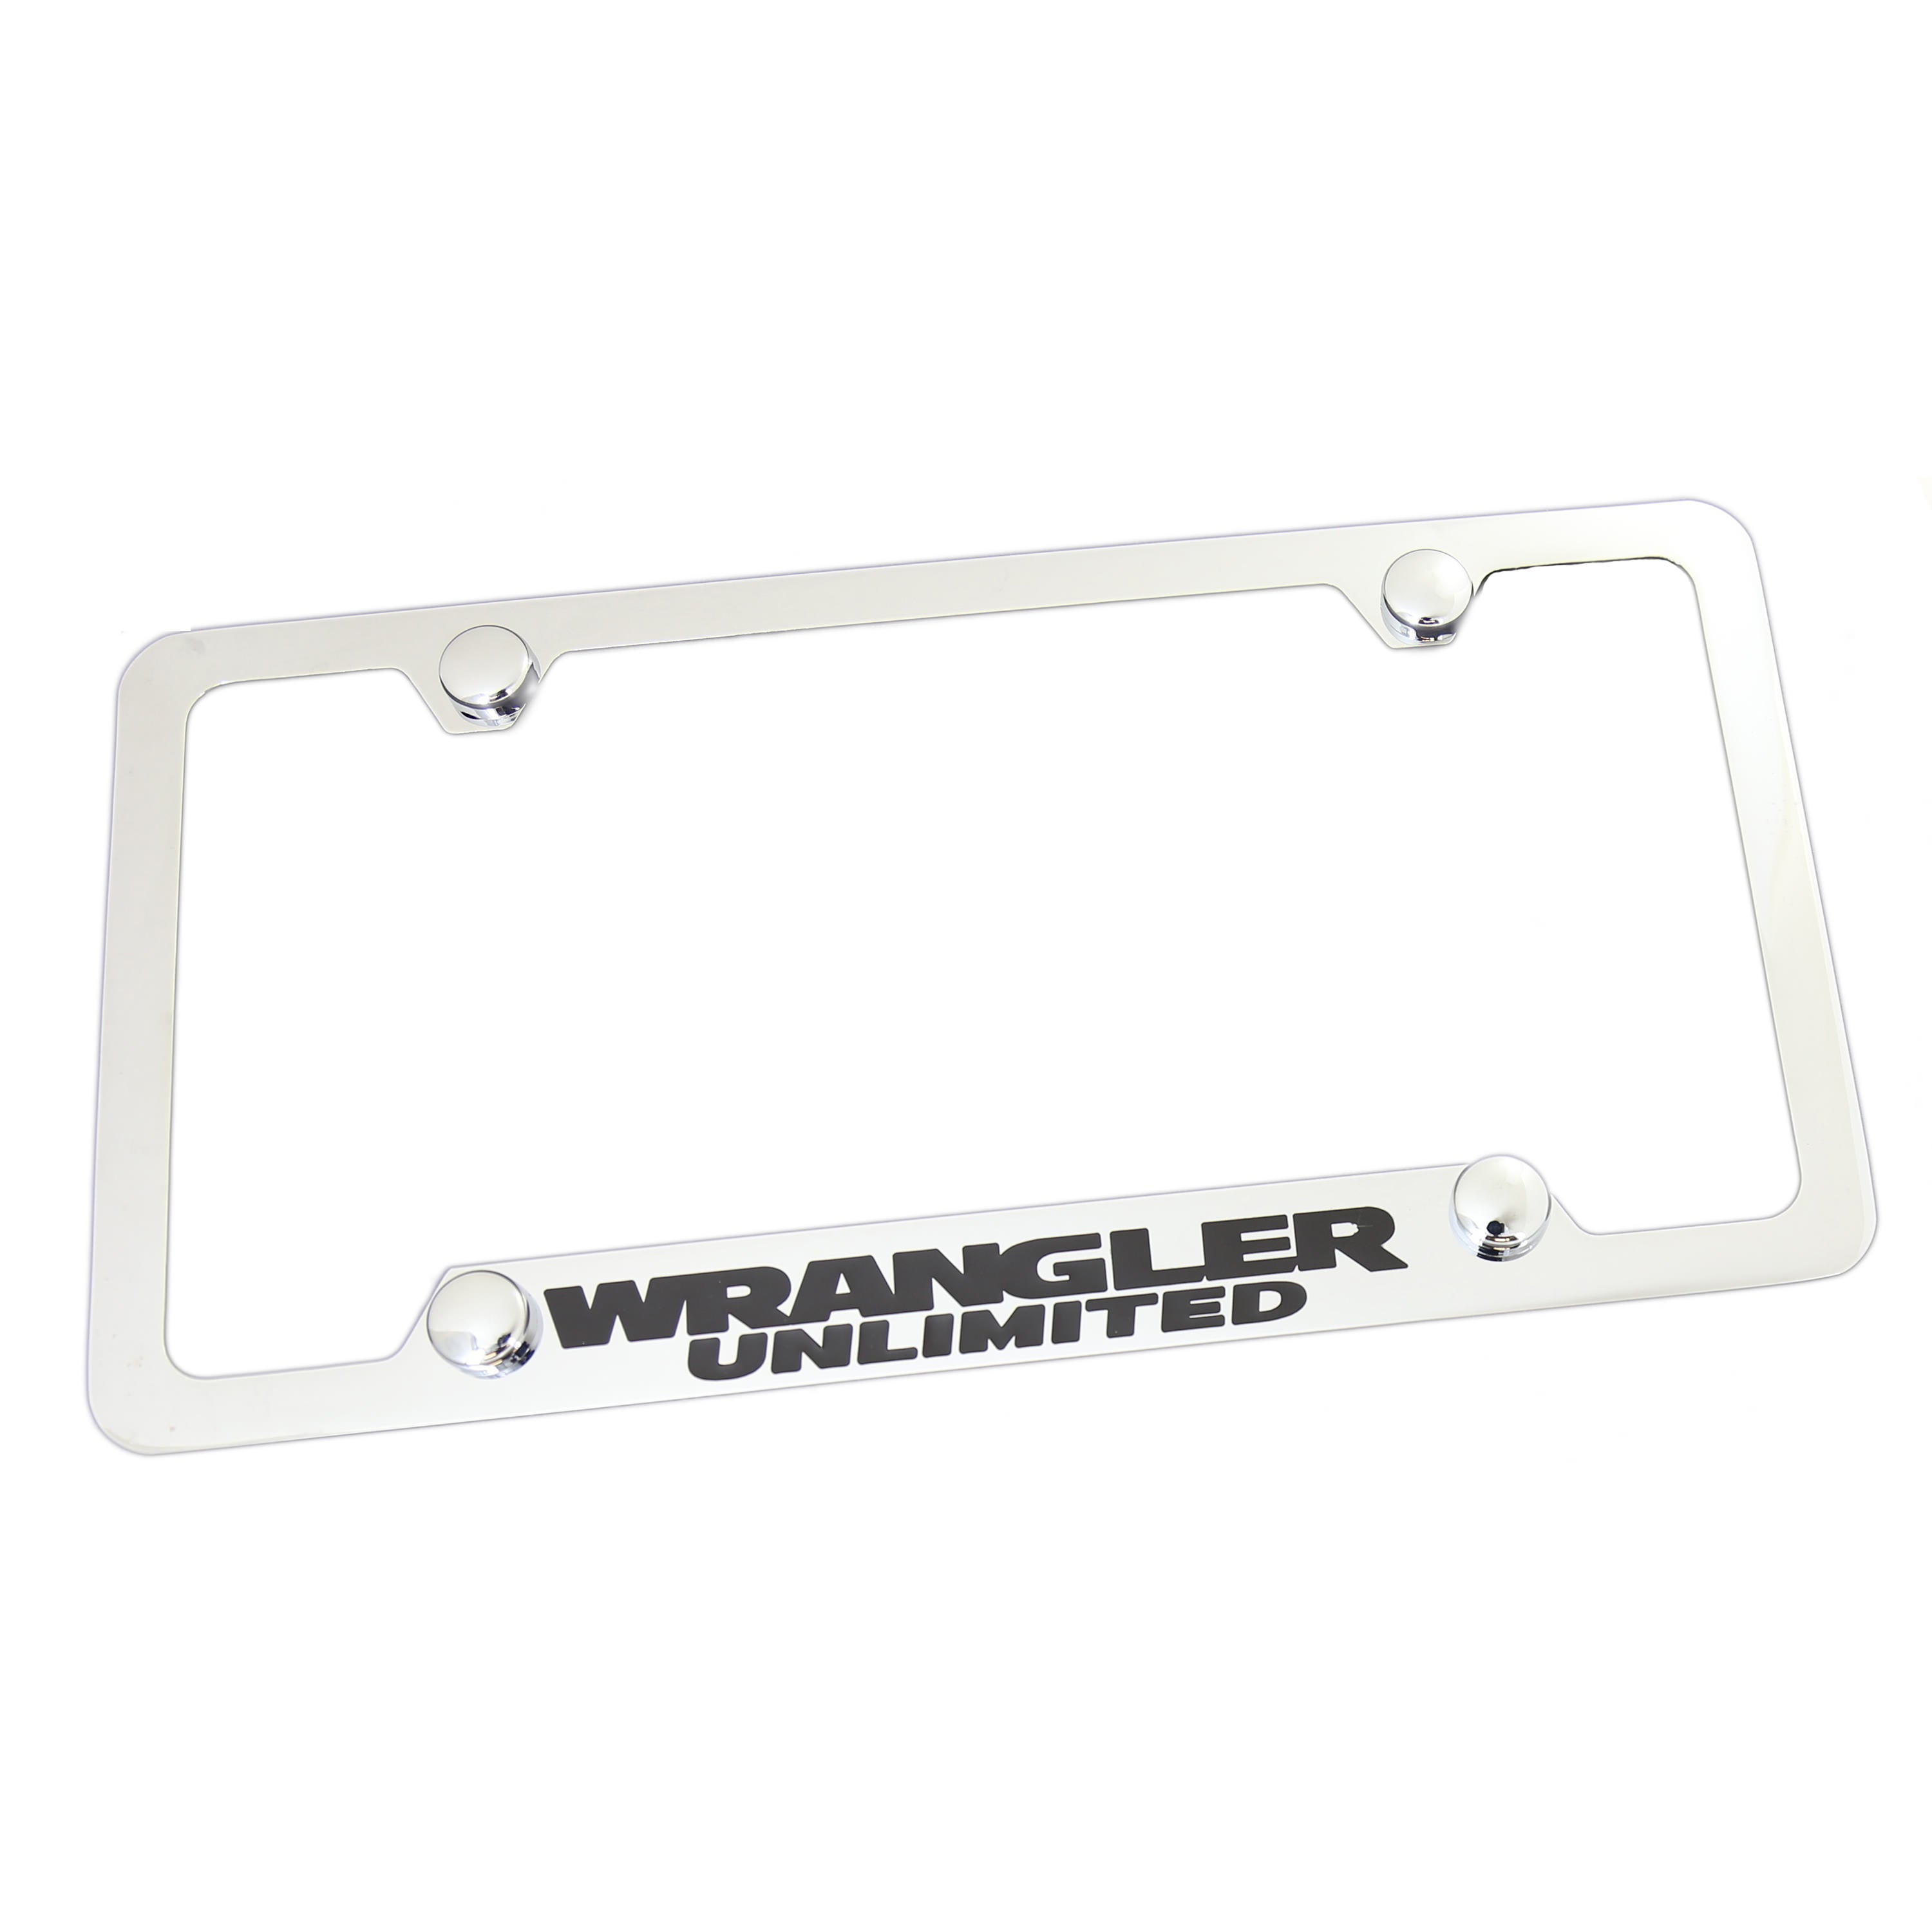 Jeep Wrangler Unlimited License Plate Frame With 4 Hole (Chrome) - Custom Werks